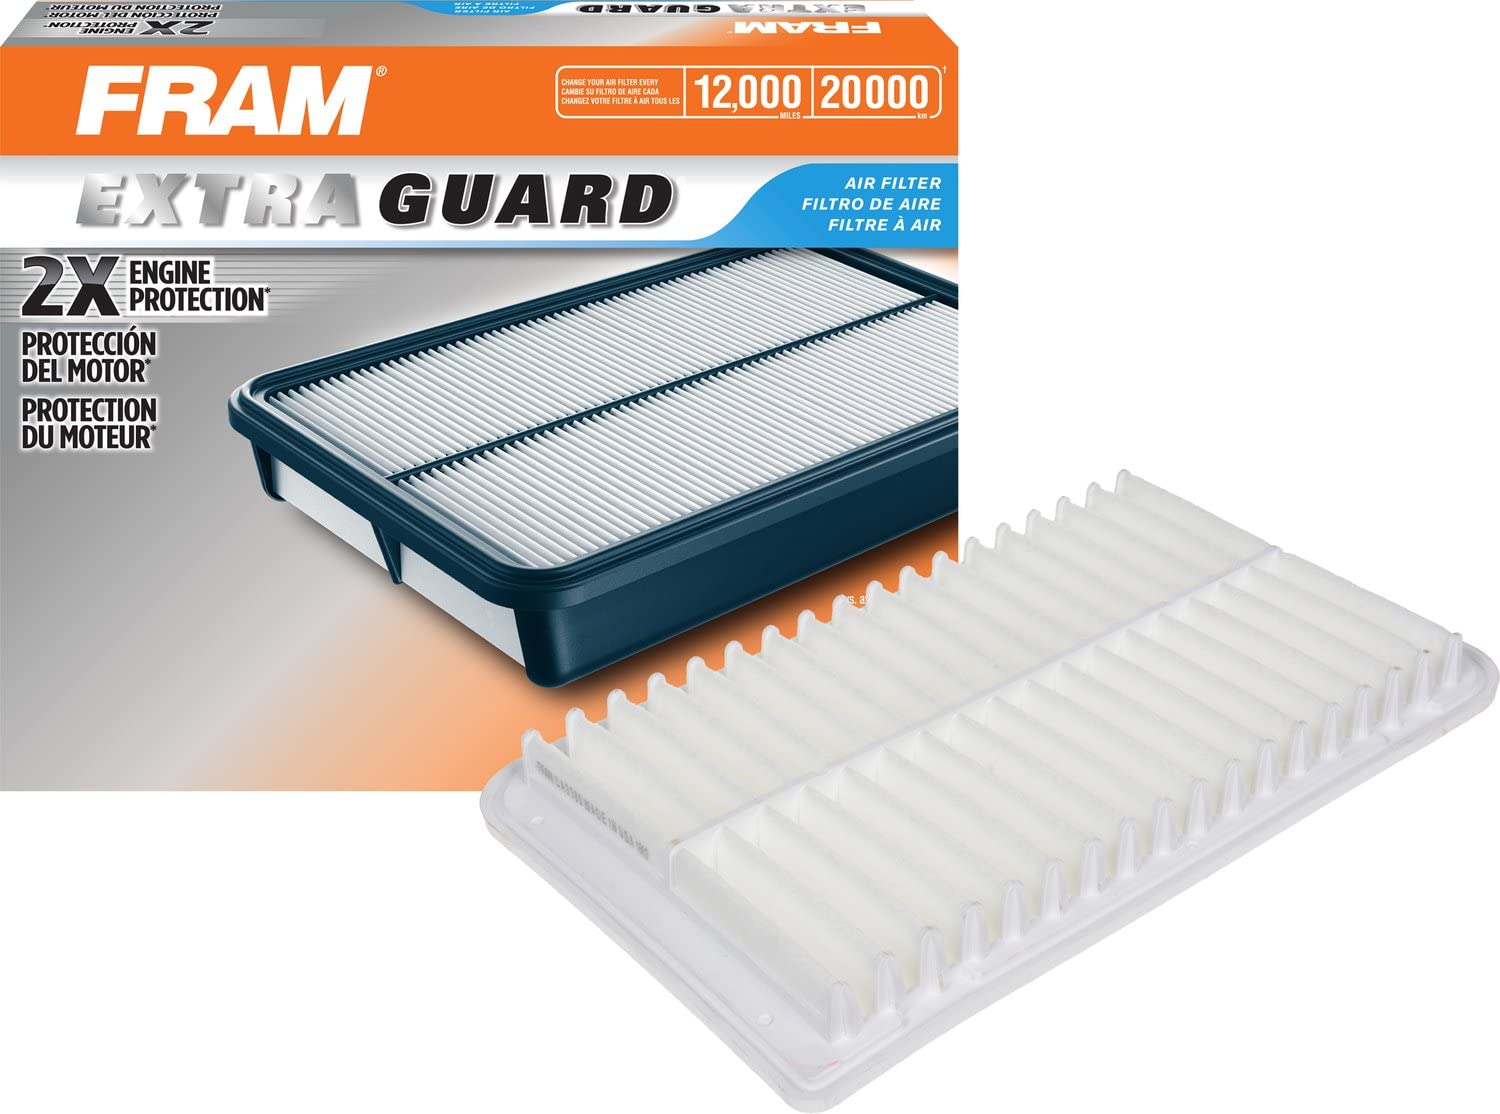 FRAM Extra Guard Air Filter, CA9360 for Select Lexus and Toyota Vehicles (1 Filter)